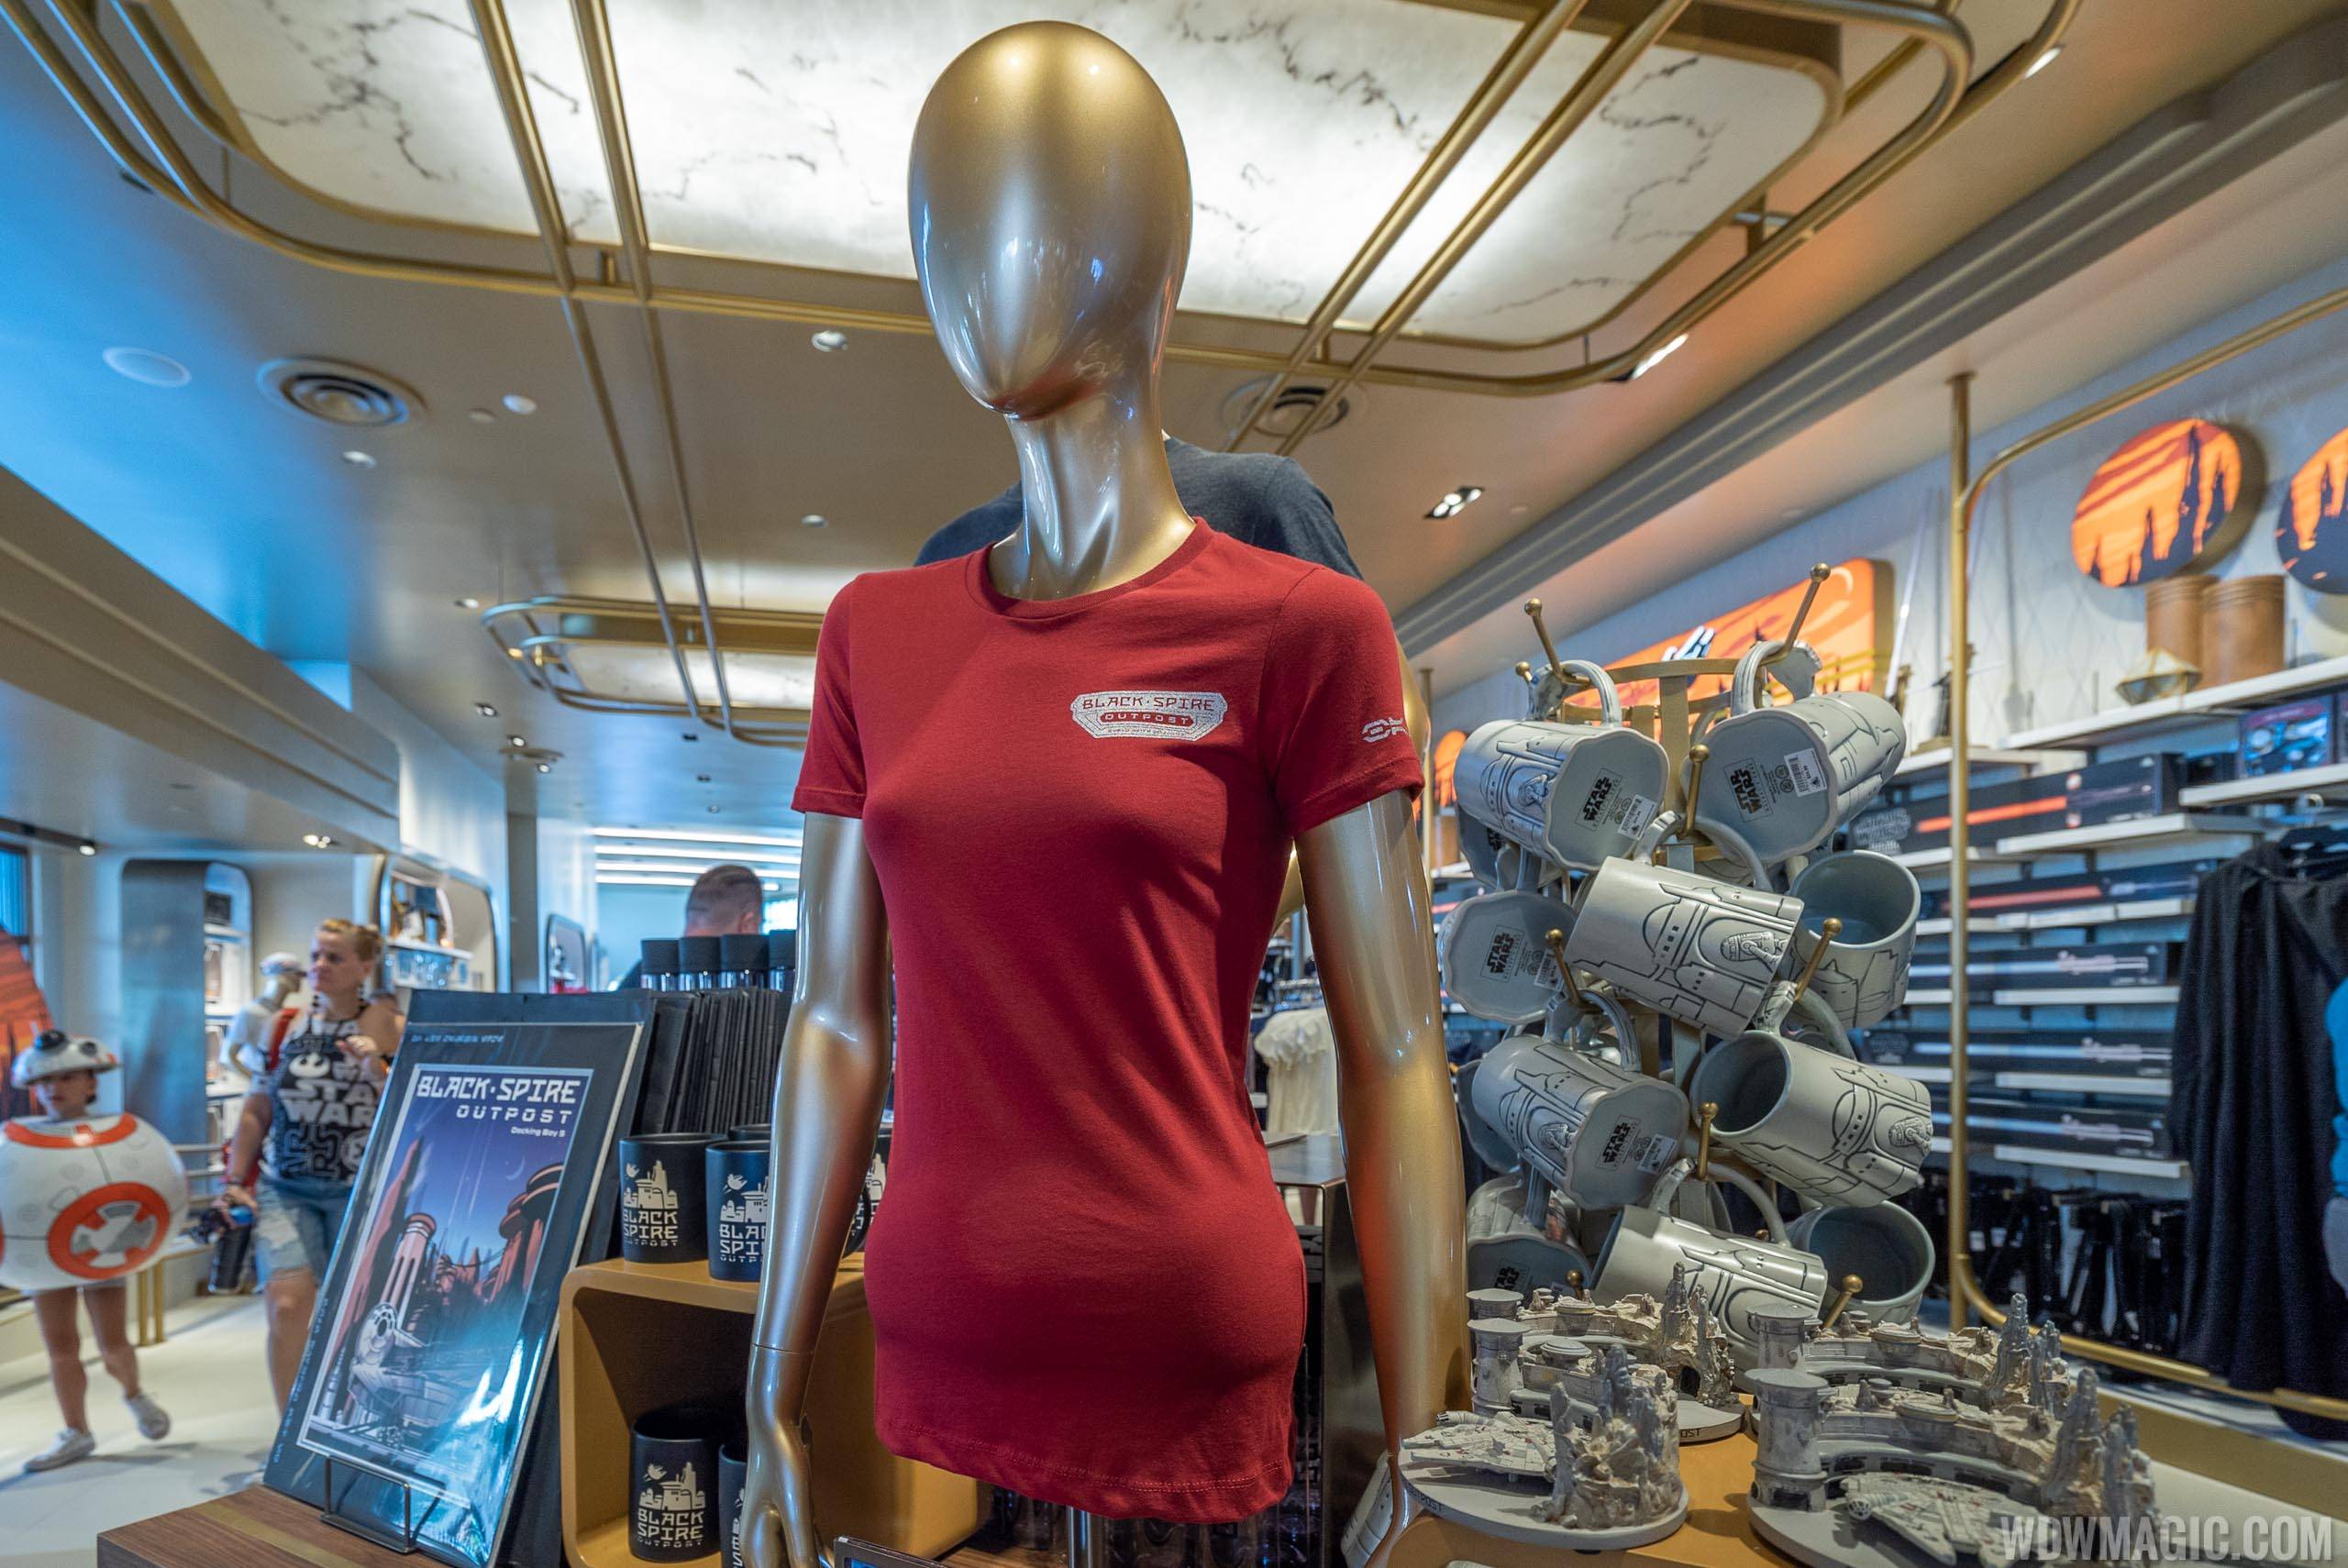 Keystone Clothiers reopens at Disney's Hollywood Studios as Star Wars merchandise location